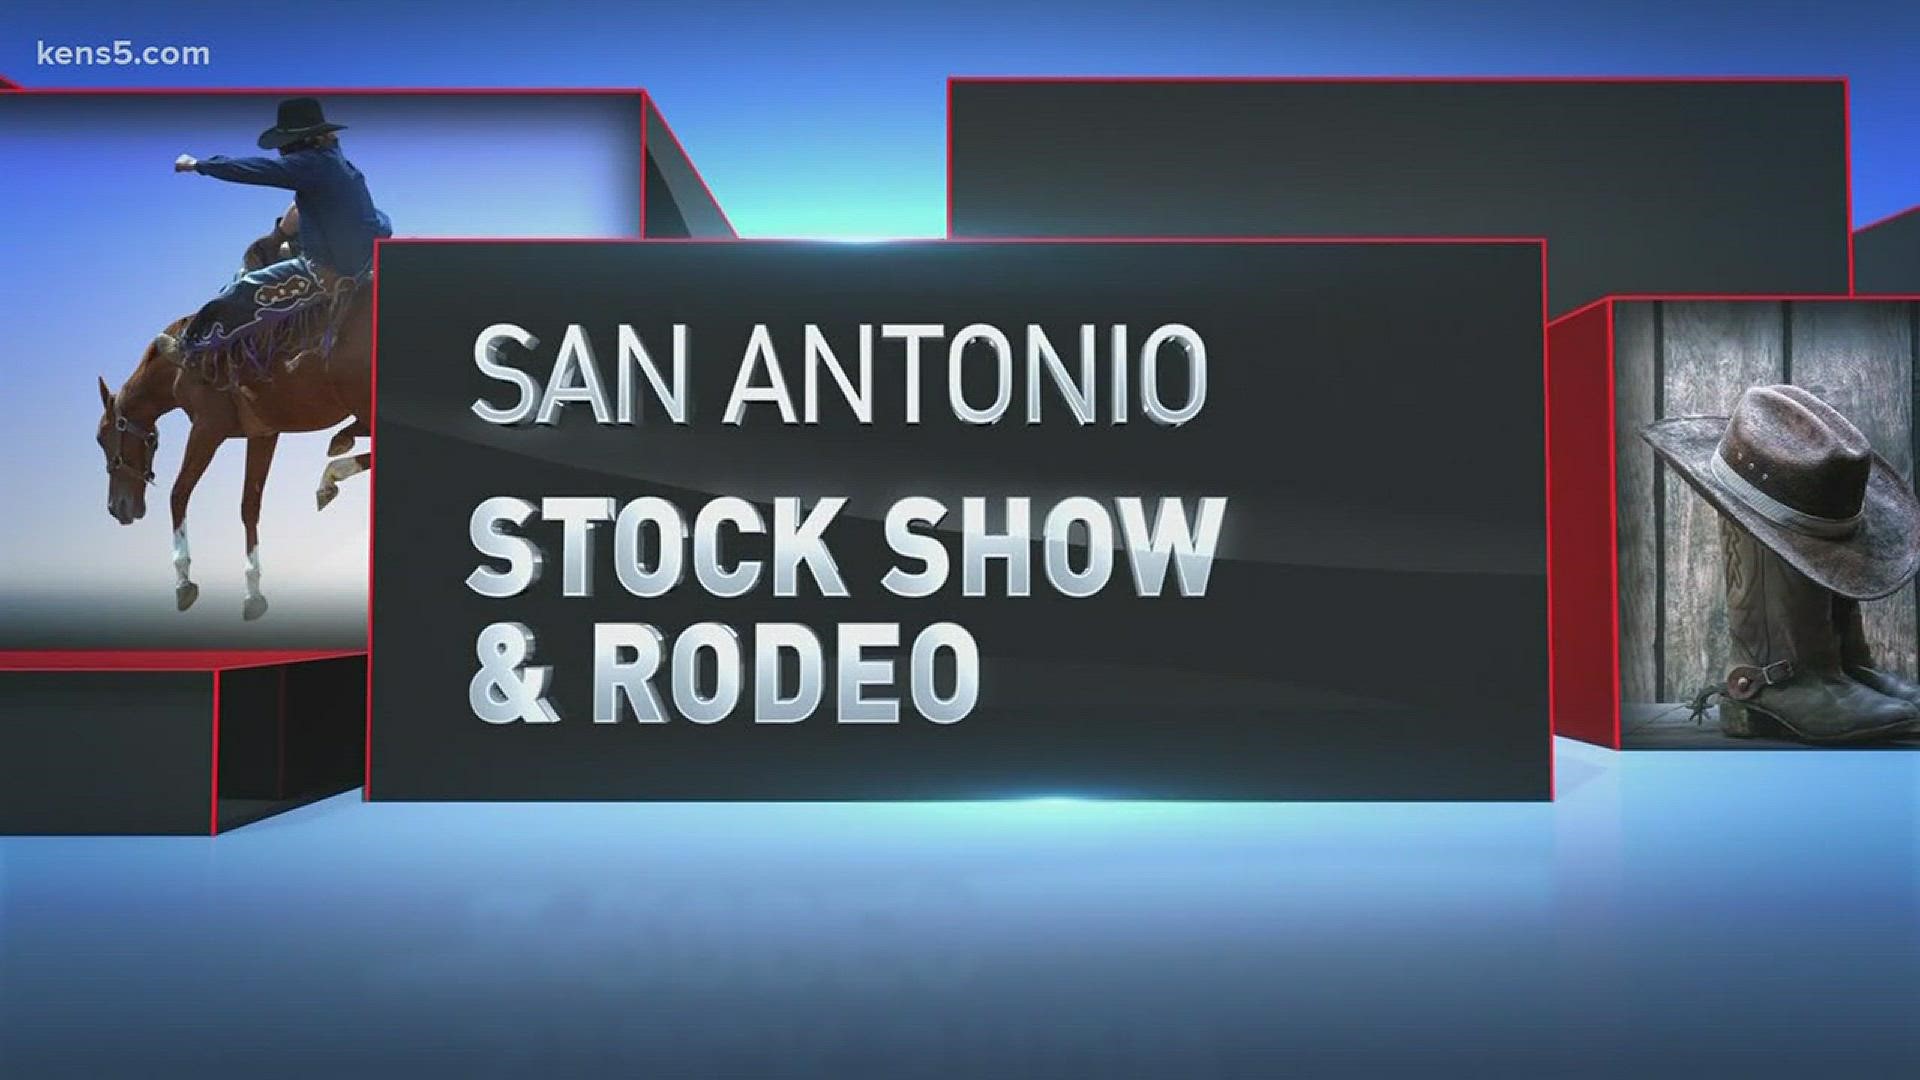 Check back at KENS5.com every day for all your Mutton Bustin' highlights!